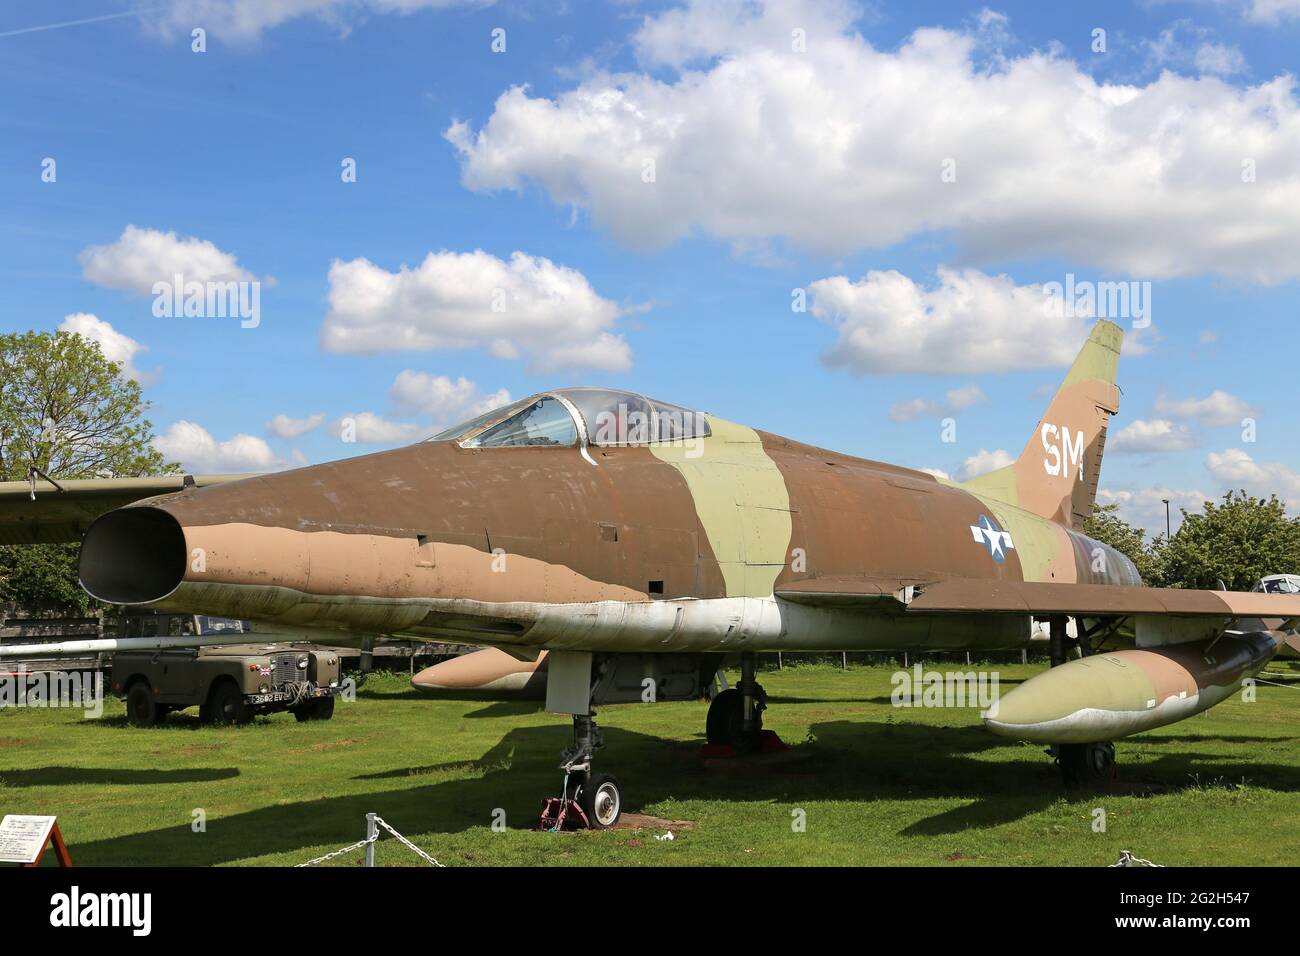 North American Super Sabre F-100D (1953), Midland Air Museum, Coventry Airport, Baginton, Warwickshire, England, Great Britain, UK, Europe Stock Photo